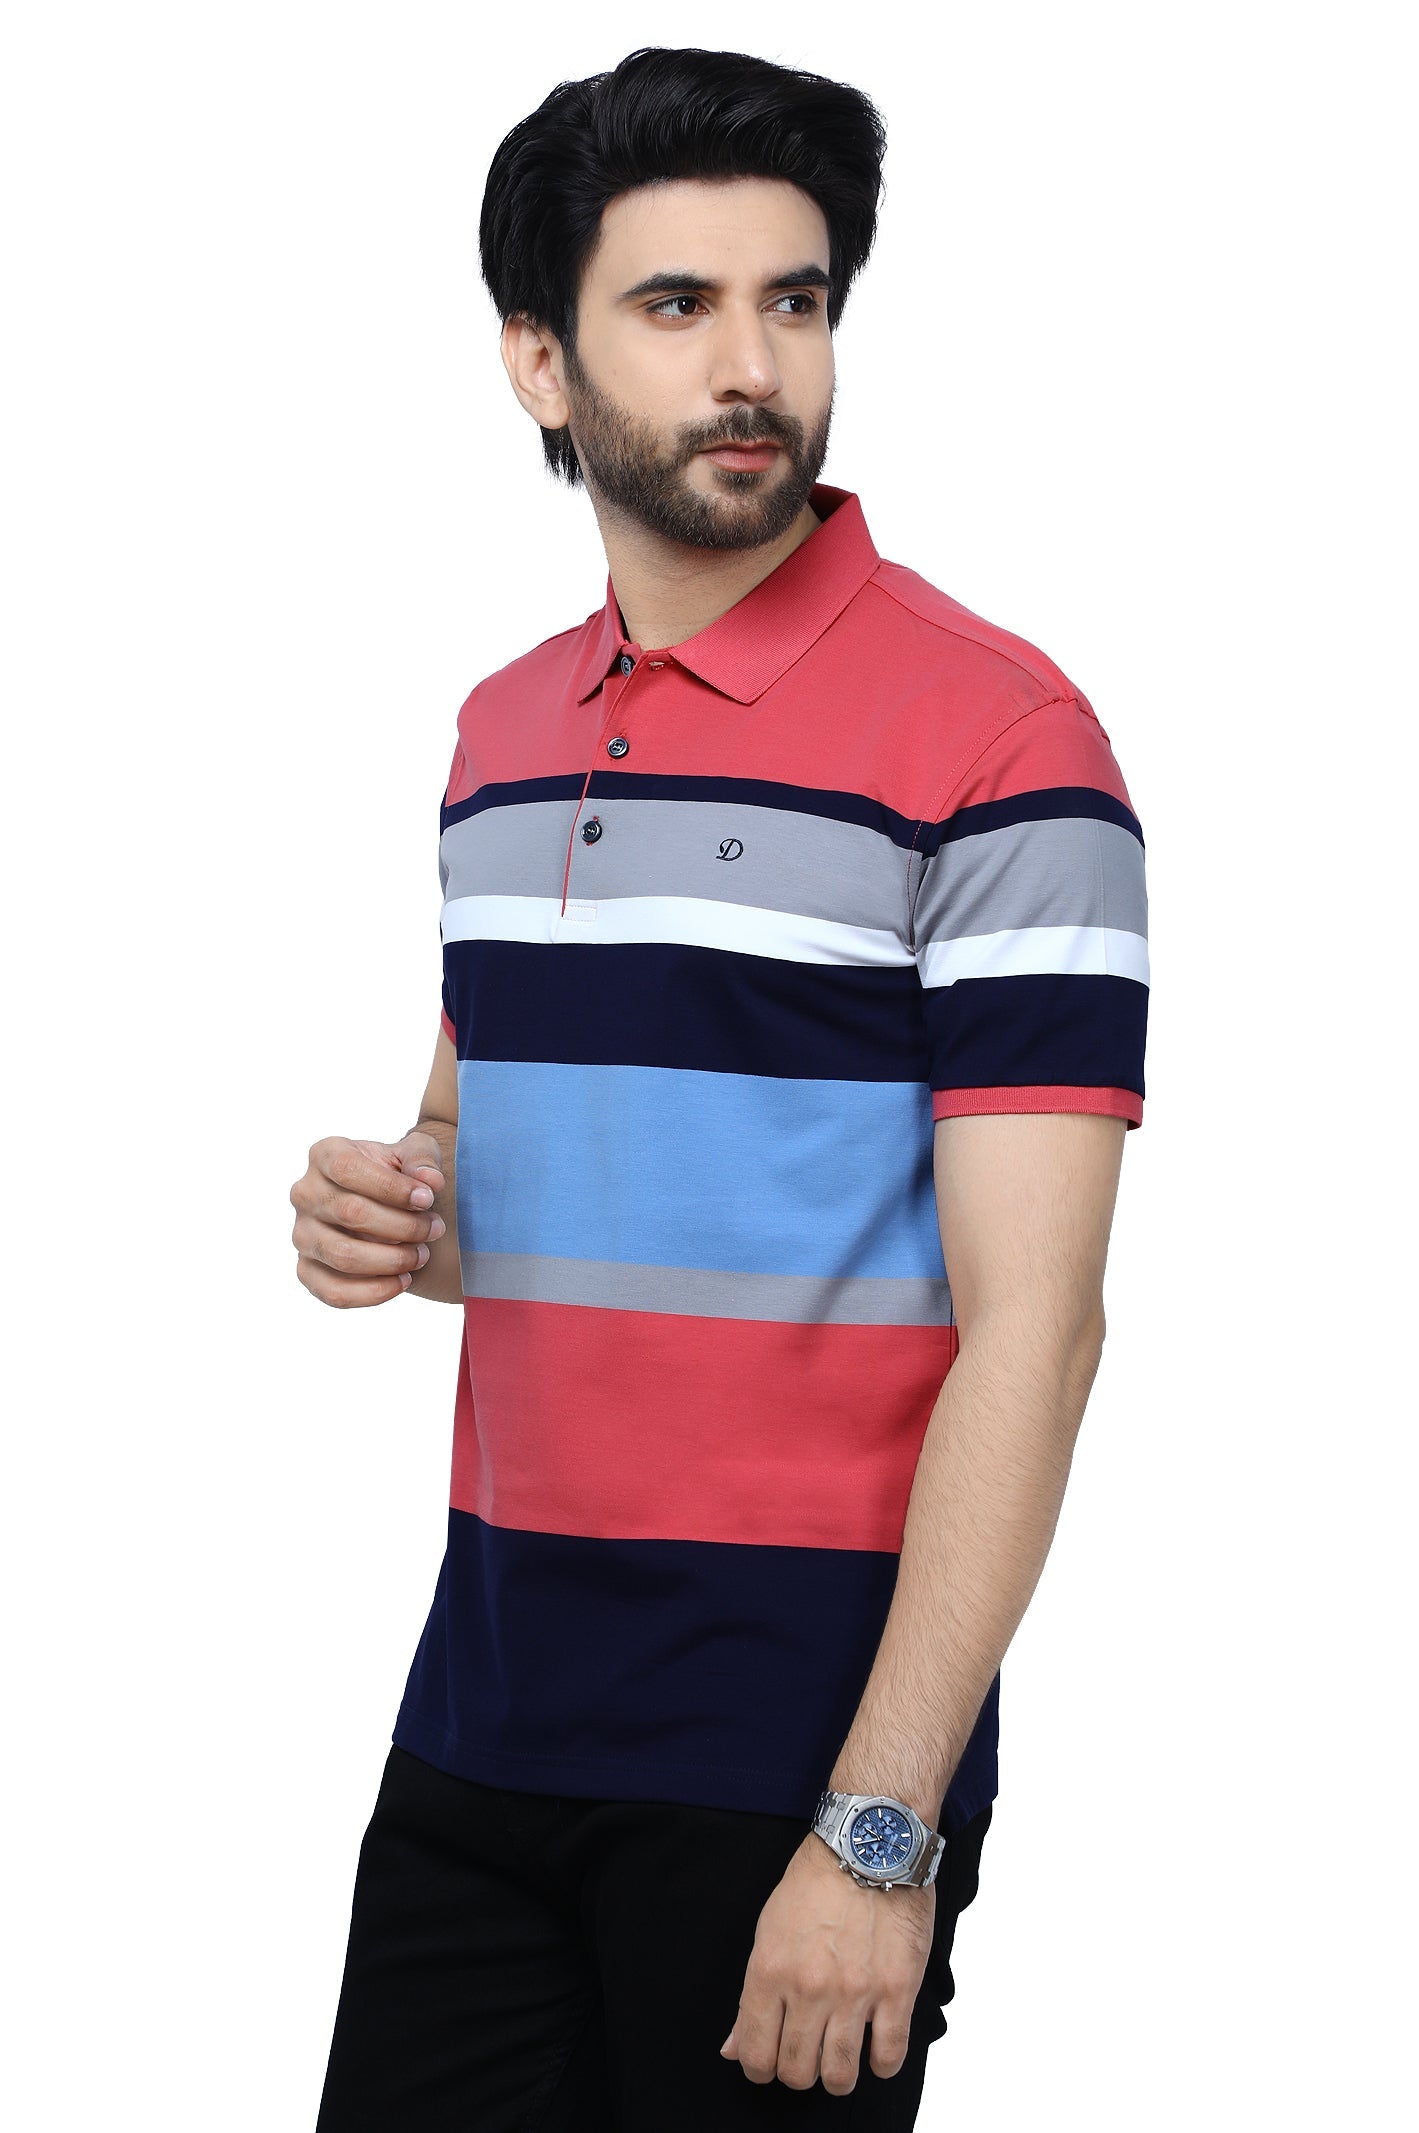 Diners Men's Polo T-Shirt SKU: NA895-PINK - Diners